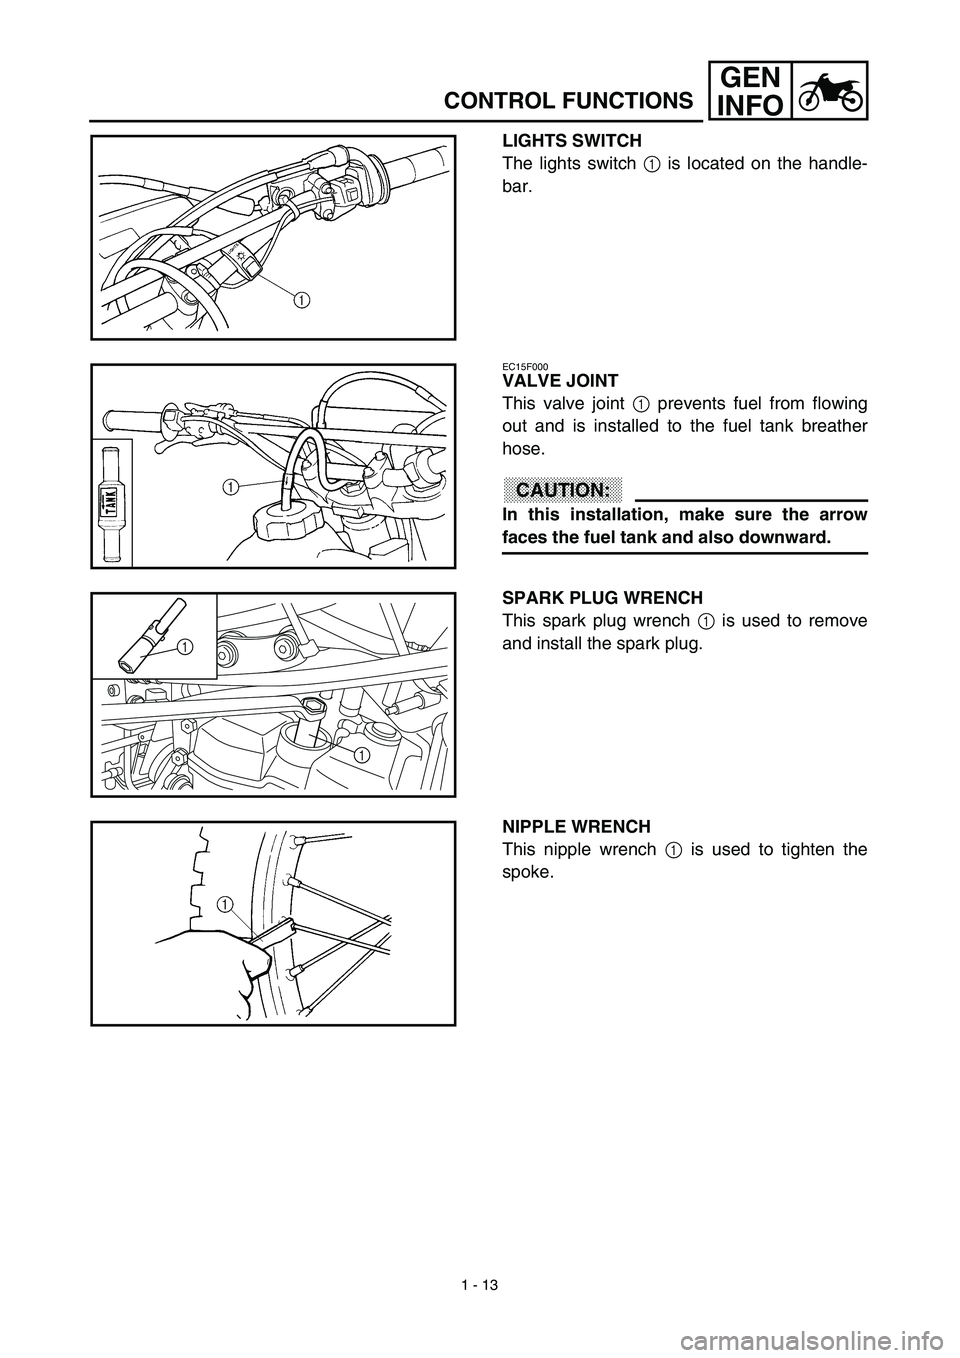 YAMAHA WR 450F 2003  Owners Manual 1 - 13
GEN
INFO
LIGHTS SWITCH
The lights switch 1 is located on the handle-
bar.
EC15F000
VALVE JOINT
This valve joint 1 prevents fuel from flowing
out and is installed to the fuel tank breather
hose.